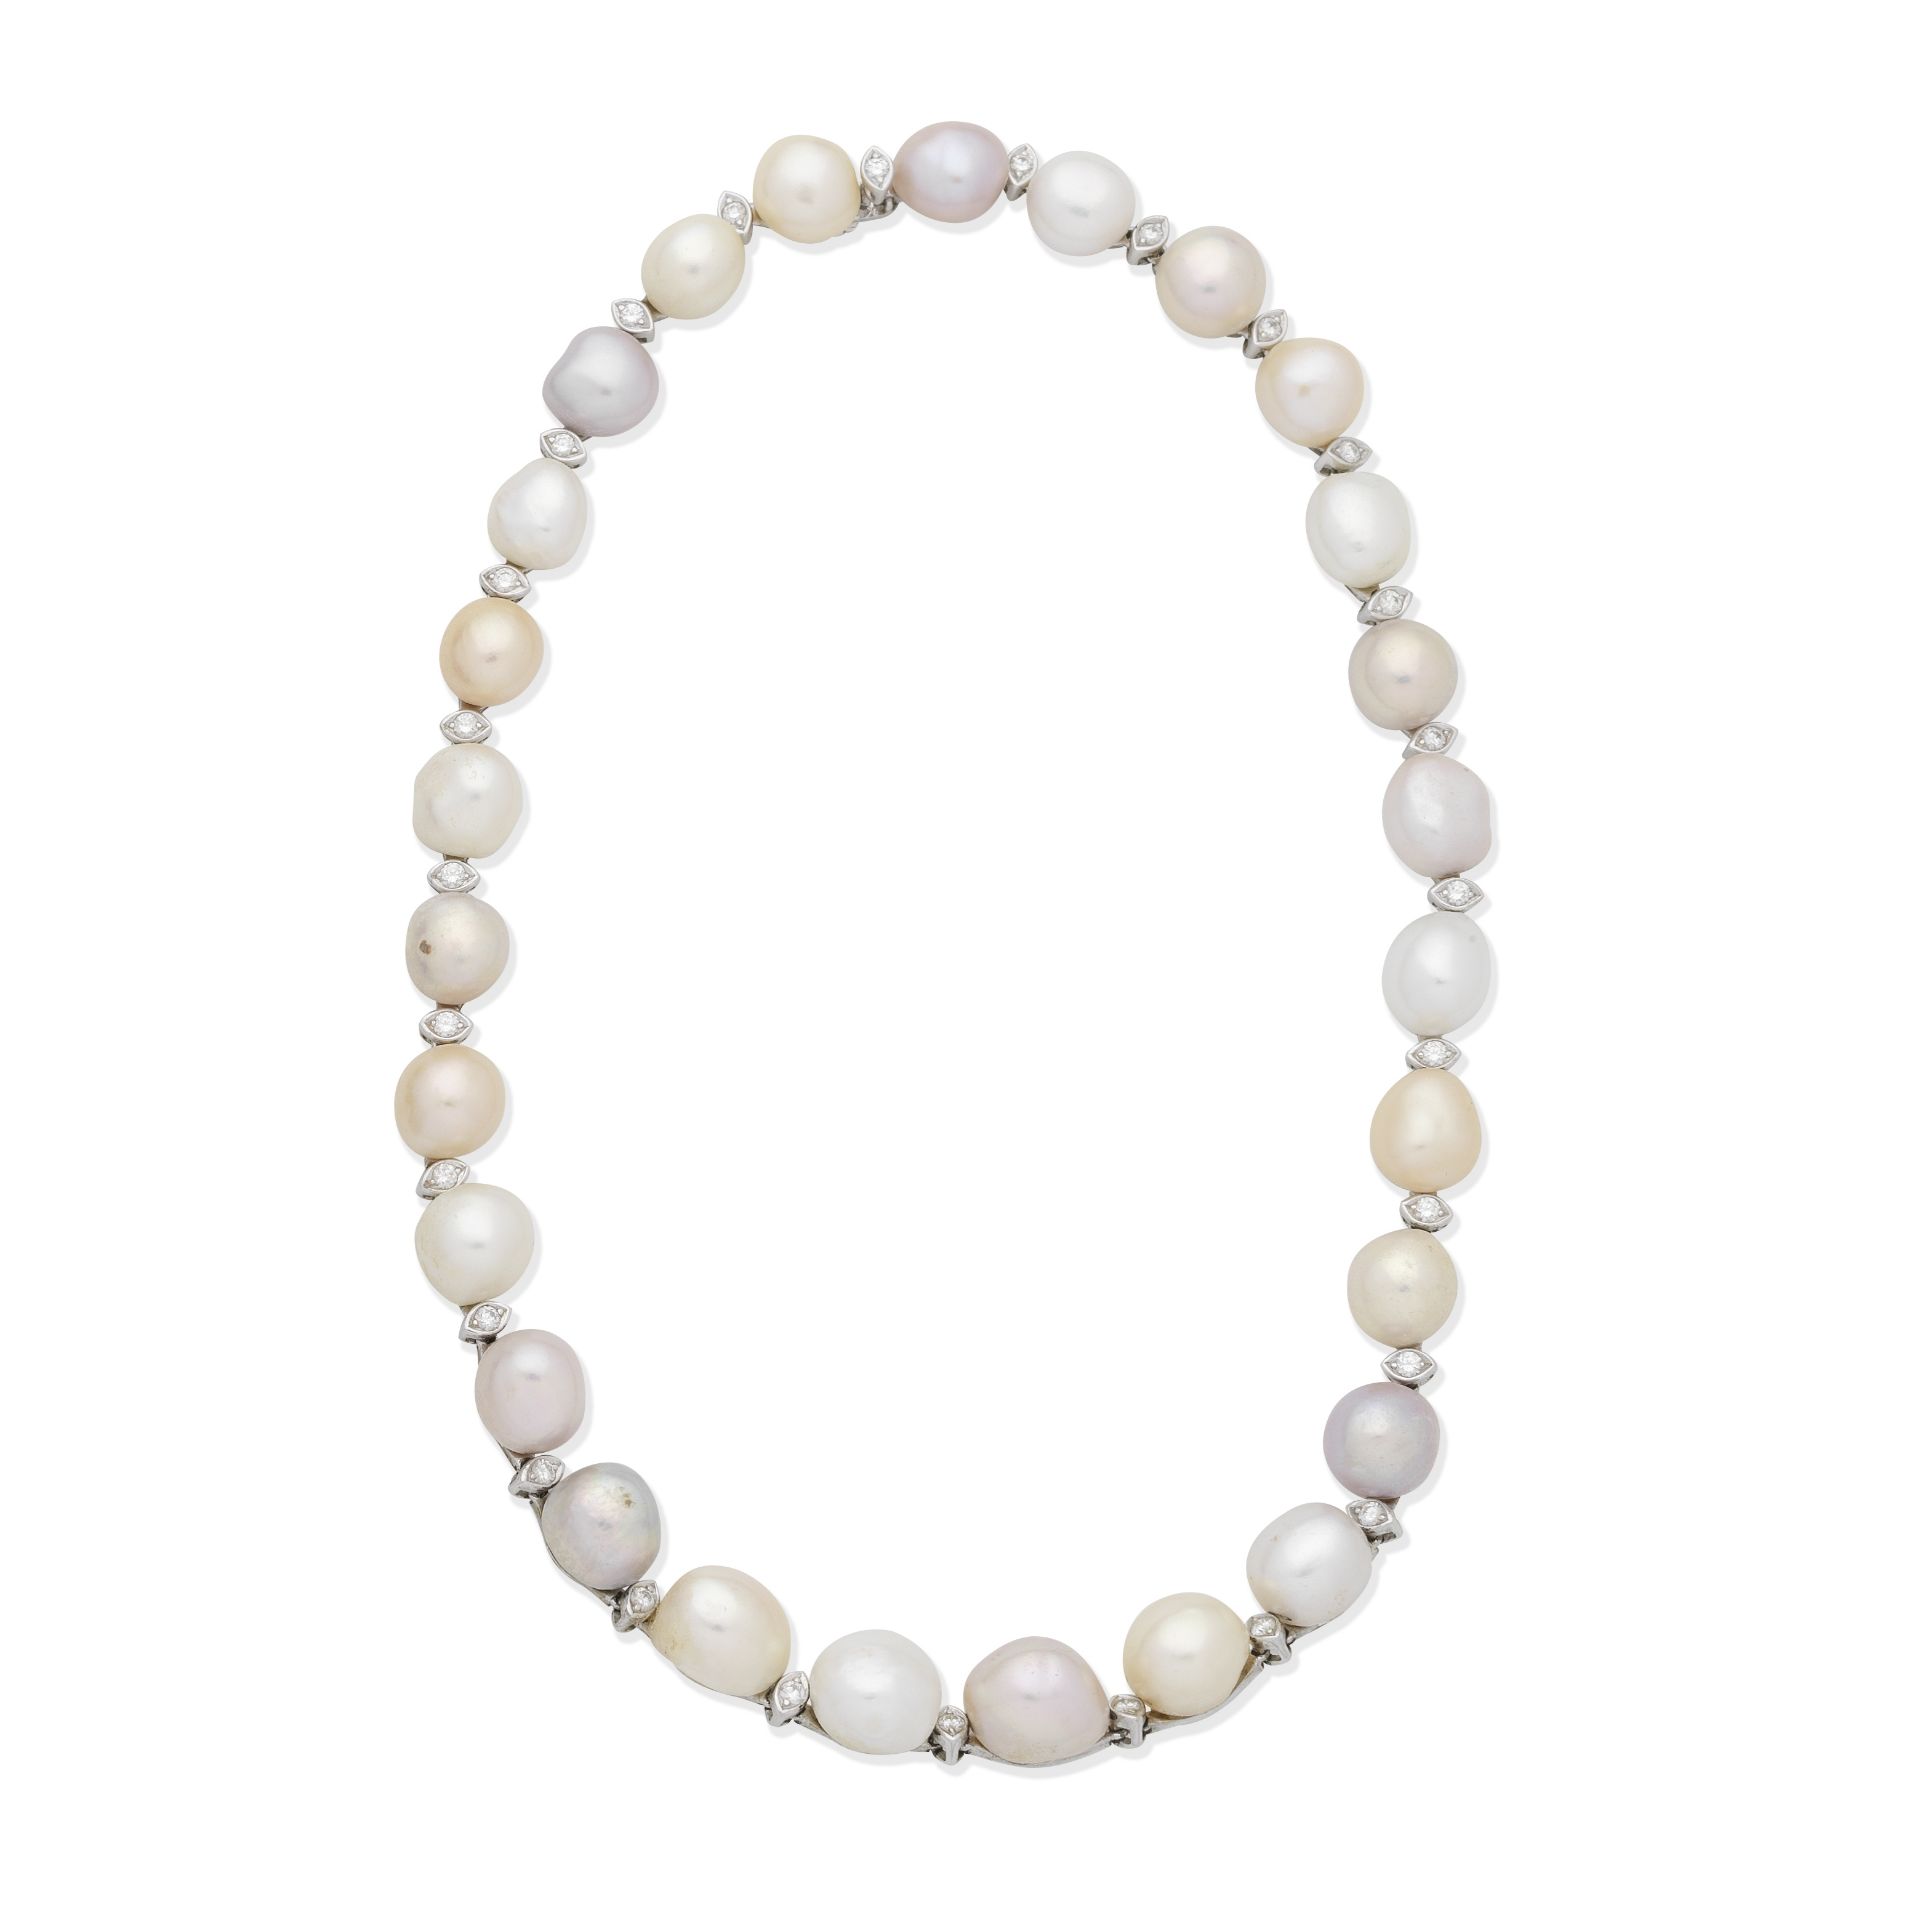 SCHOEFFEL: CULTURED PEARL AND DIAMOND NECKLACE